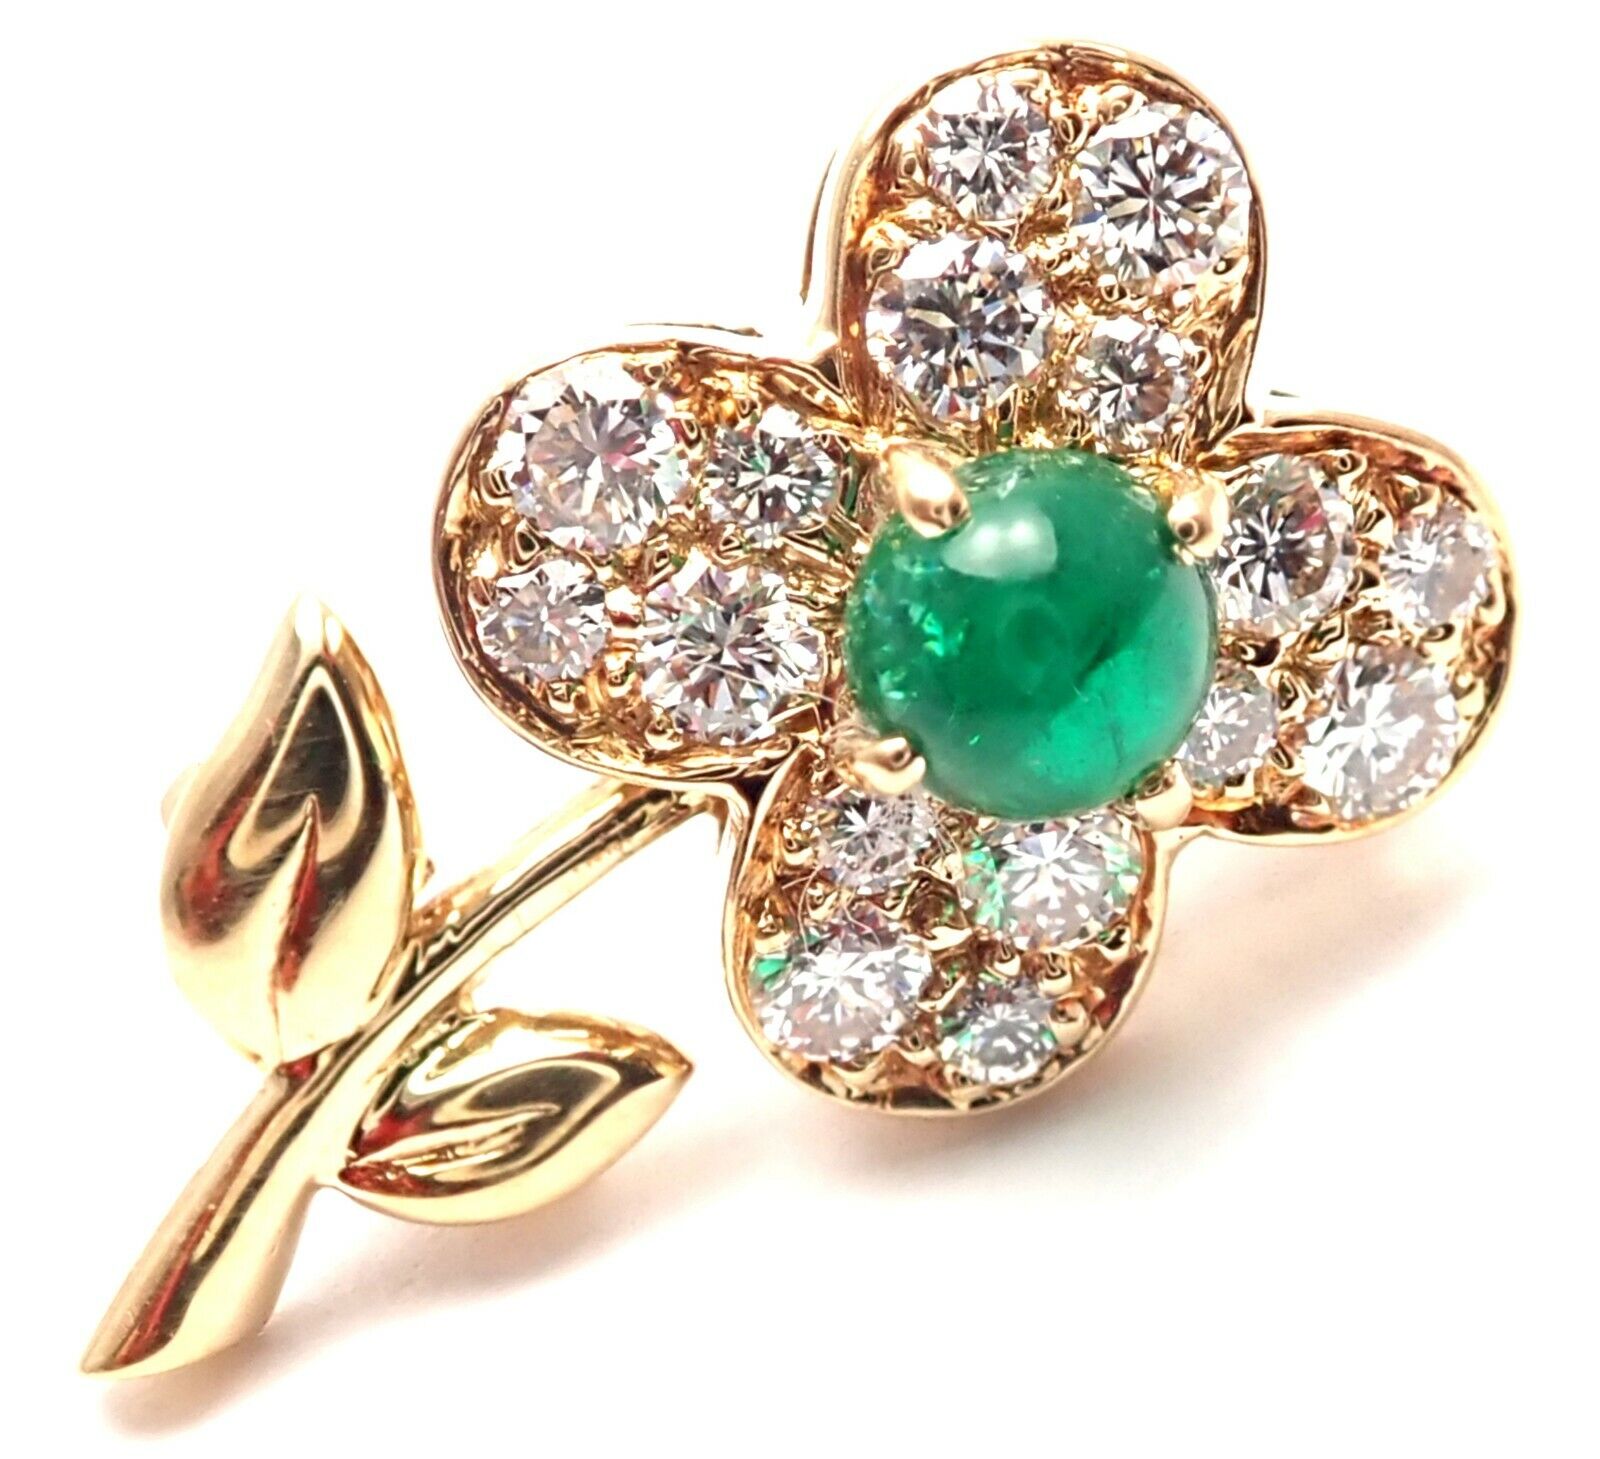 Van Cleef & Arpels Jewelry & Watches:Fine Jewelry:Brooches & Pins Authentic! Van Cleef & Arpels 18k Yellow Gold Diamond Emerald Flower Pin Brooch